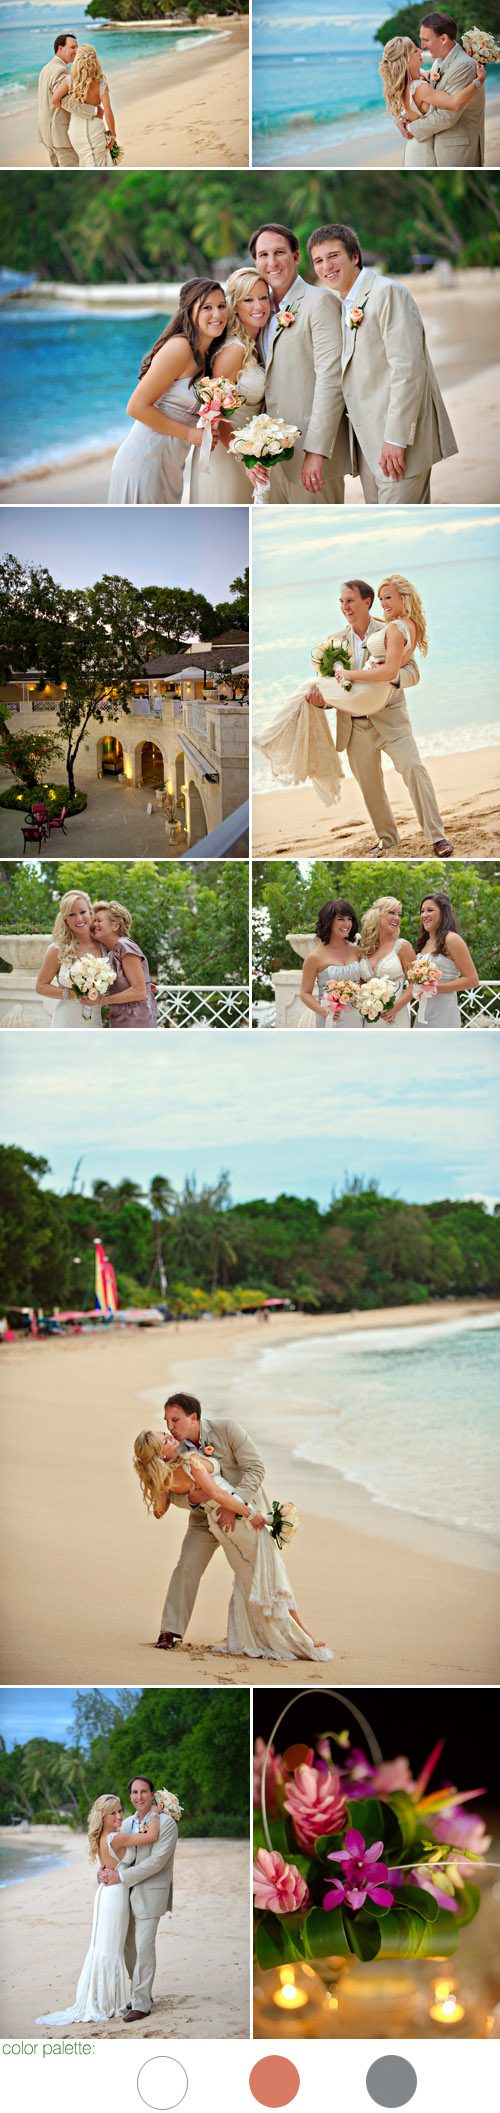 beautiful Barbados destination wedding photographed by Aves Photographic Design